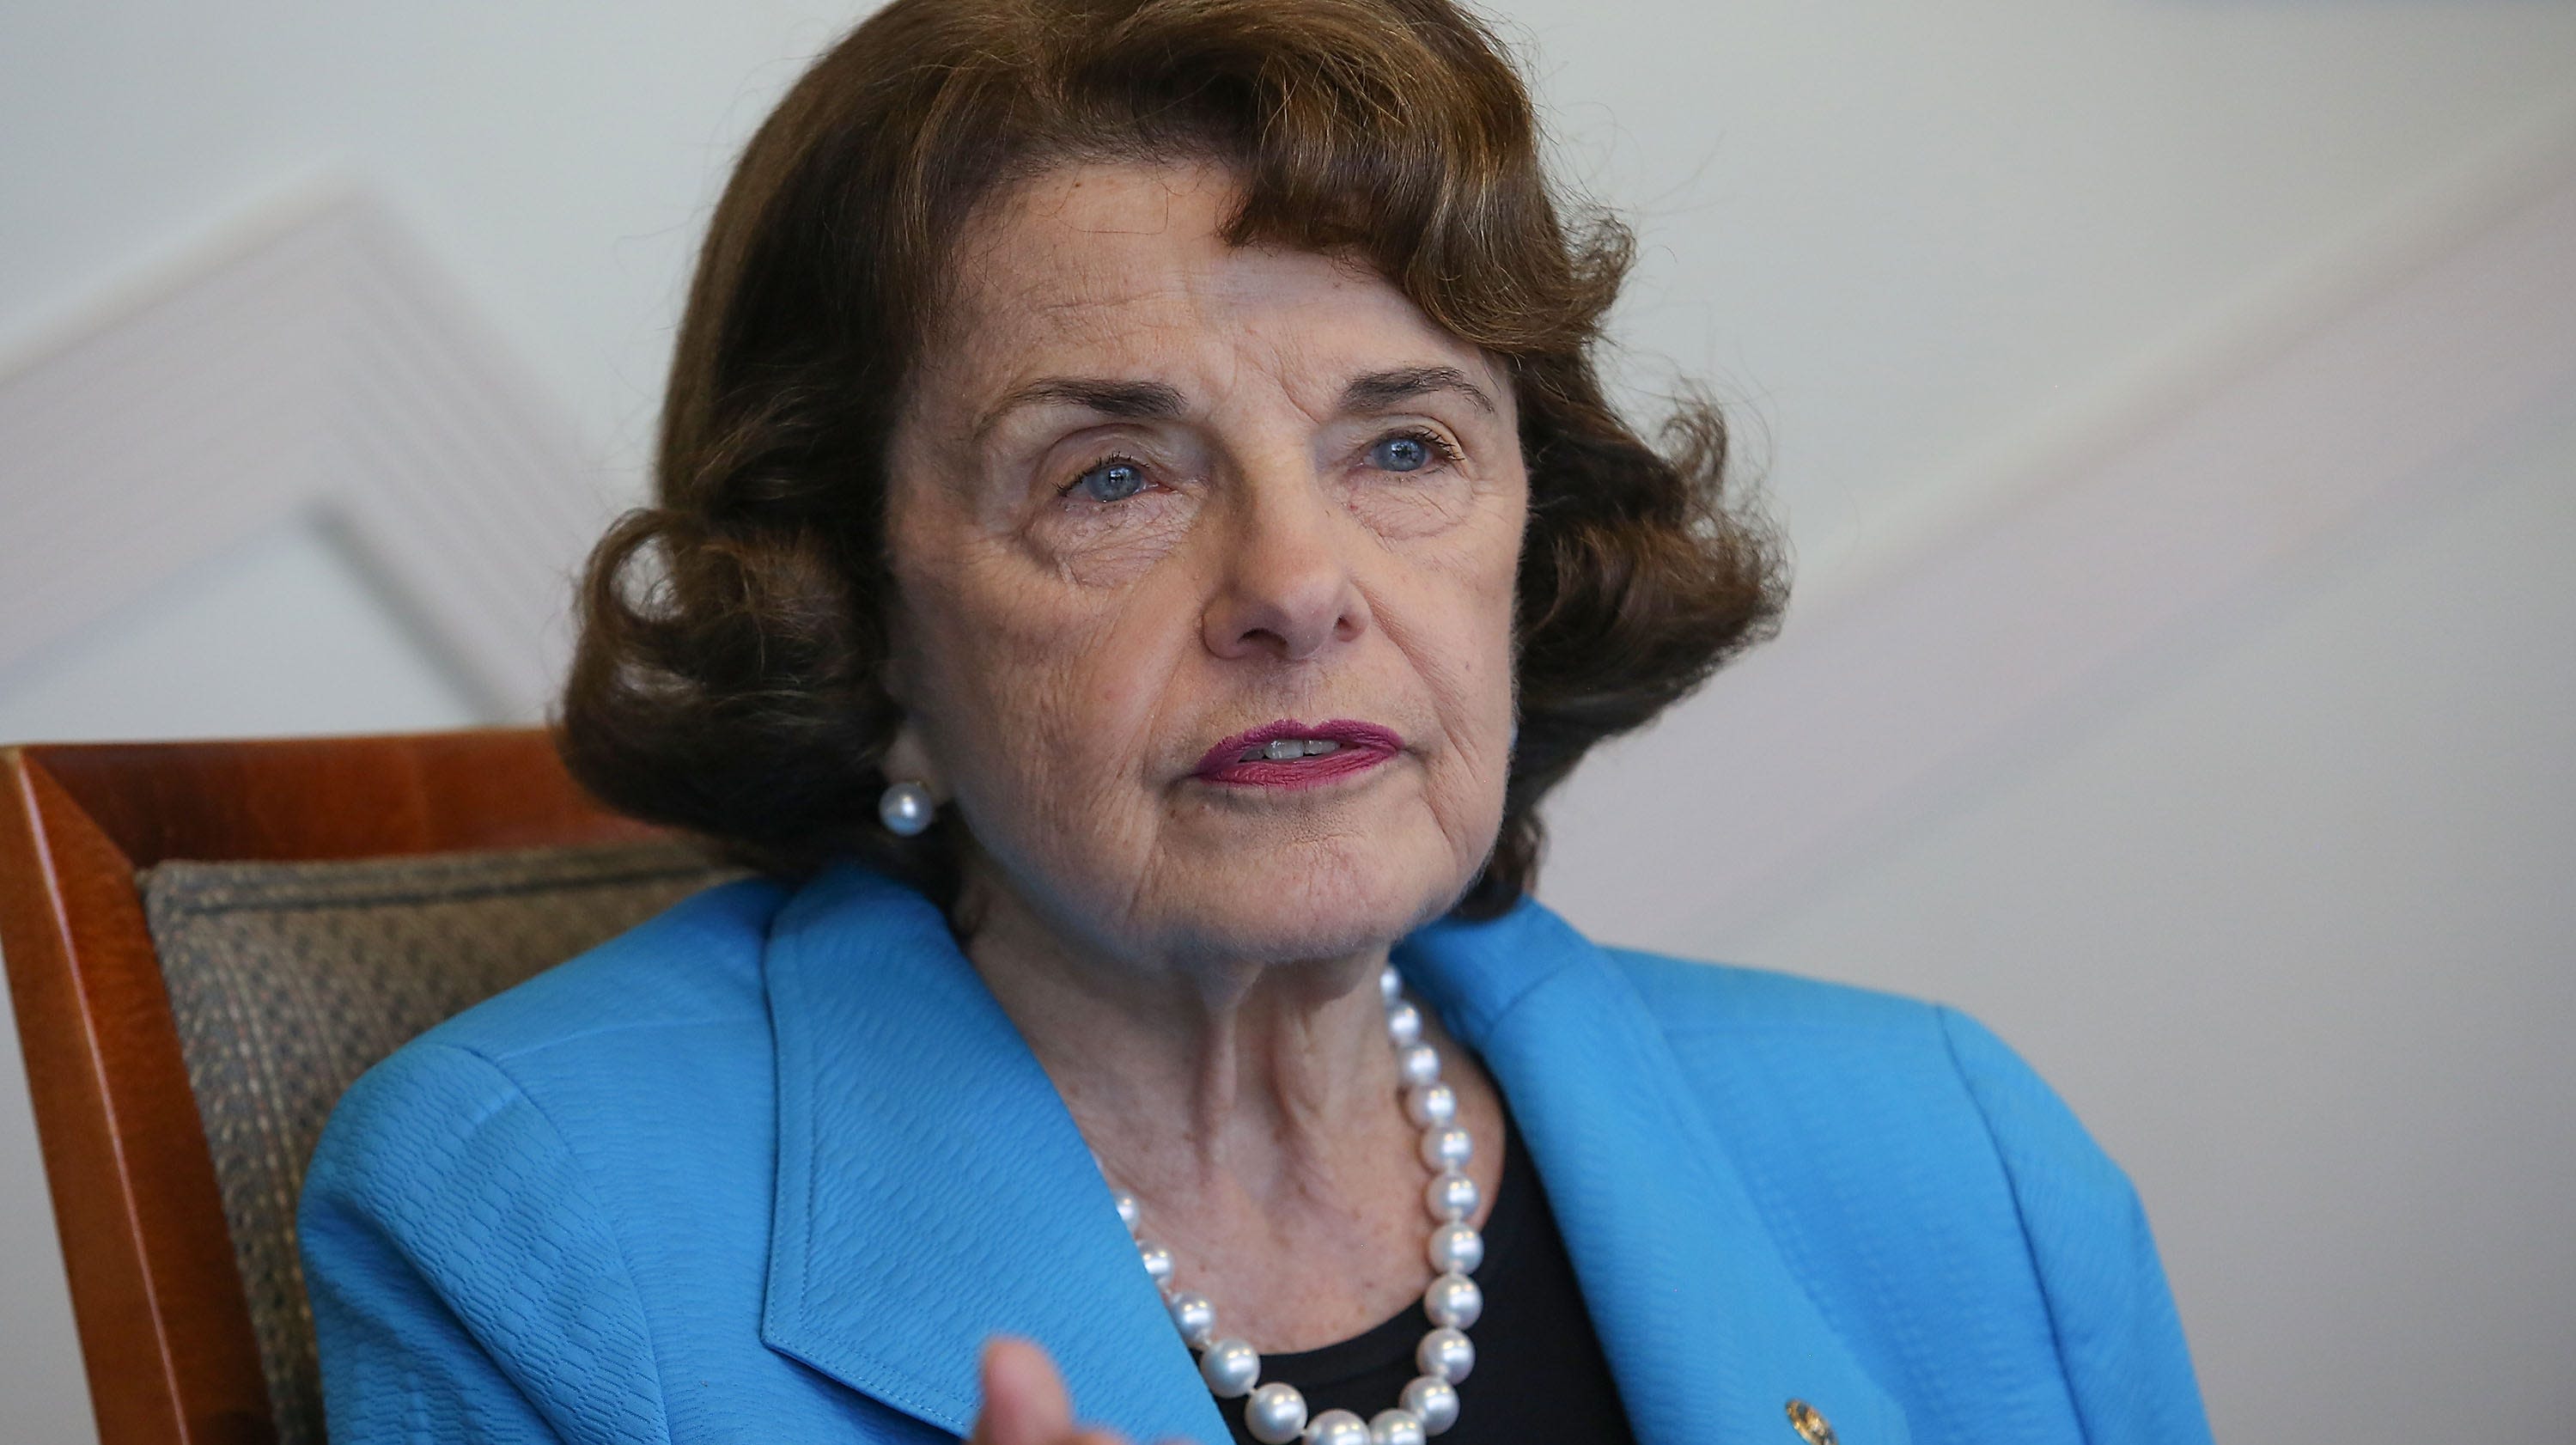 Joshua Tree National Park visitor center could be renamed for late Dianne Feinstein